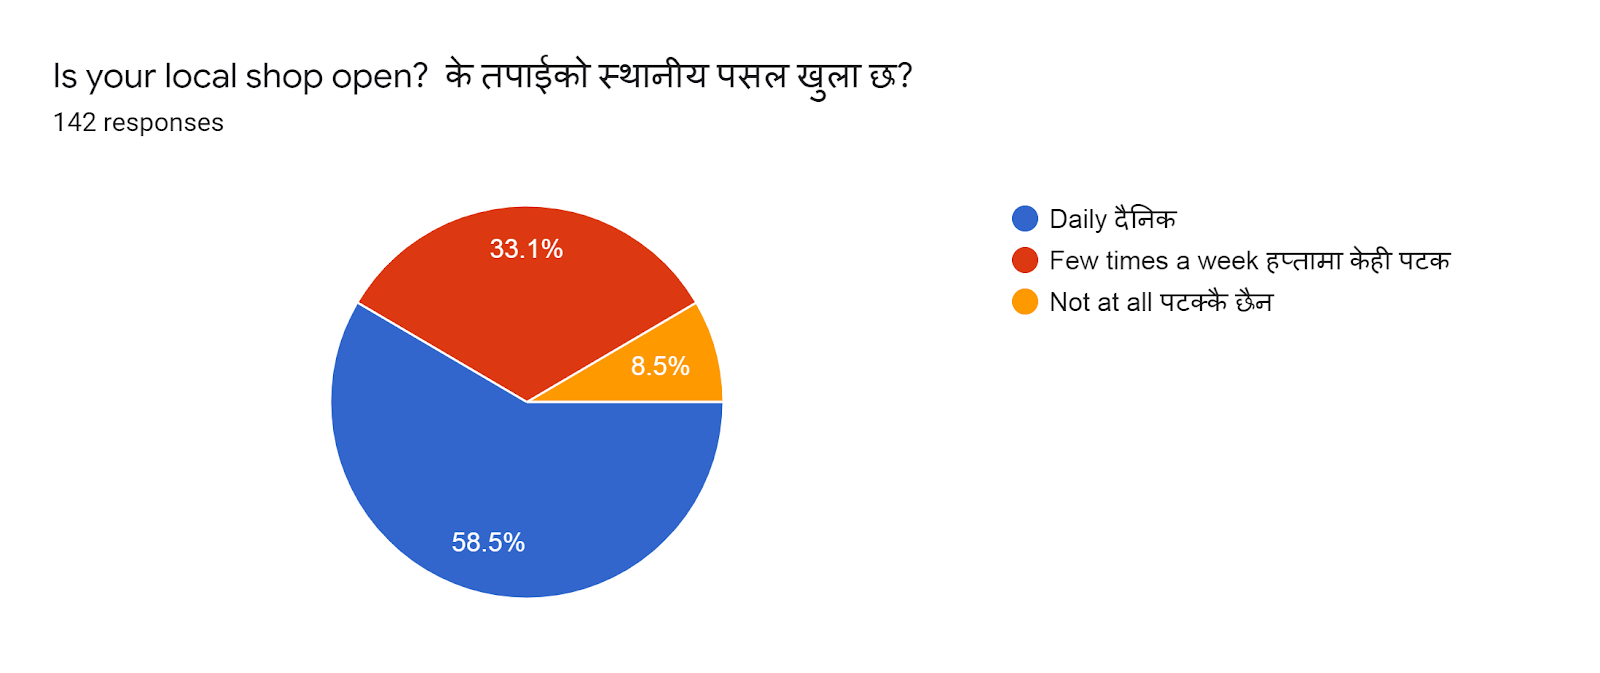 Forms response chart. Question title: Is your local shop open?  के तपाईको स्थानीय पसल खुला छ? . Number of responses: 142 responses.